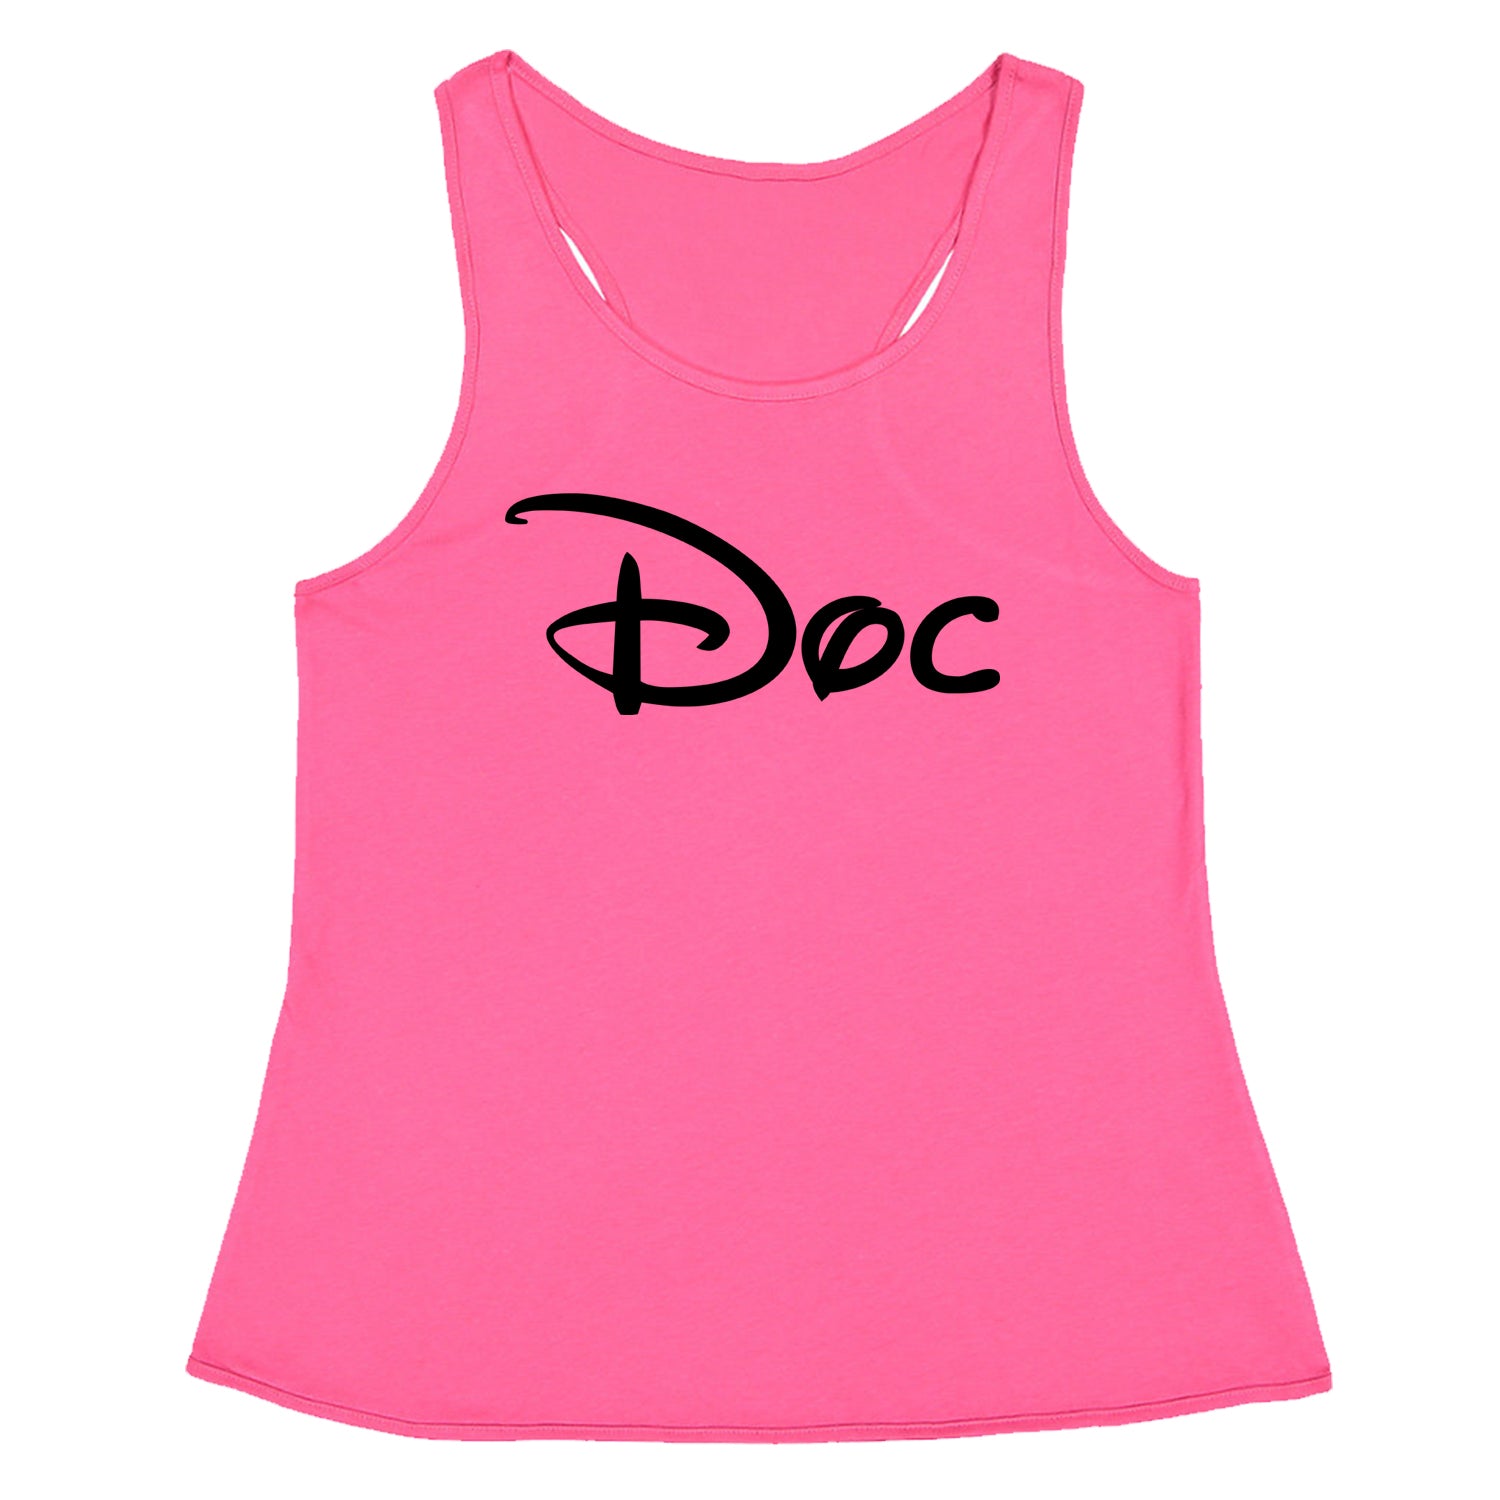 Doc - 7 Dwarfs Costume Racerback Tank Top for Women and, costume, dwarfs, group, halloween, matching, seven, snow, the, white by Expression Tees